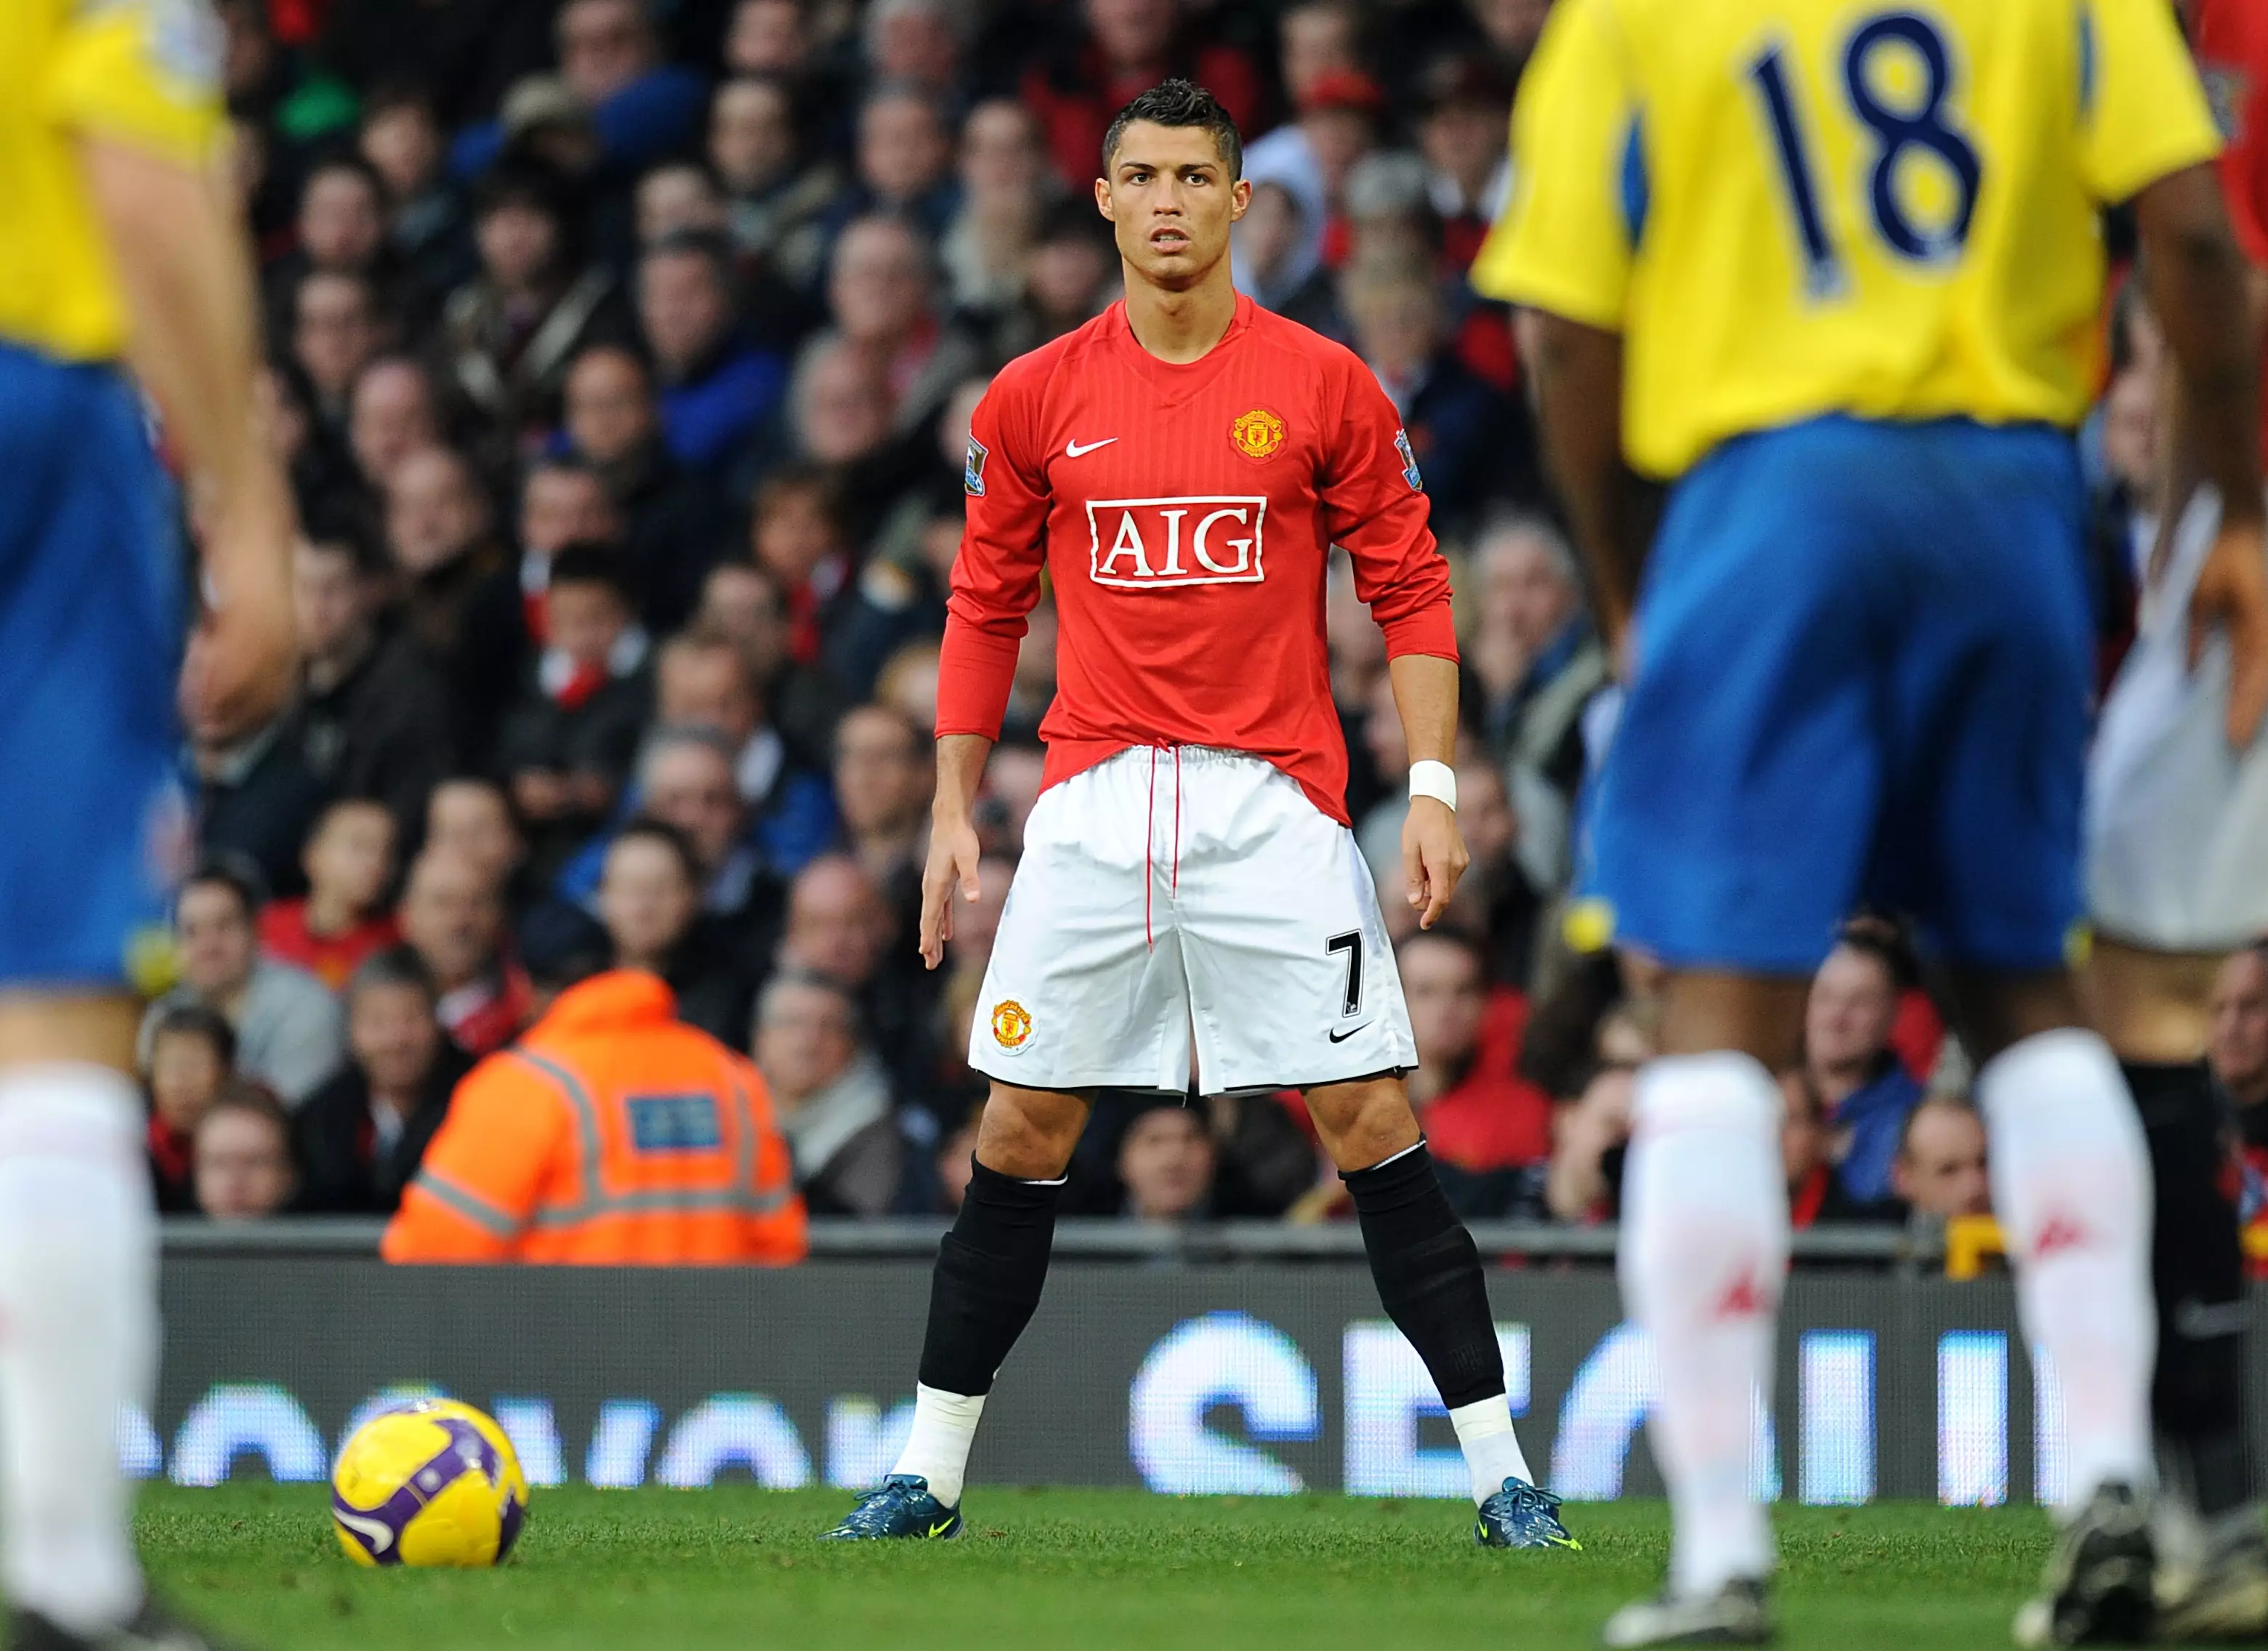 Ronaldo made almost 300 appearances for Manchester United.